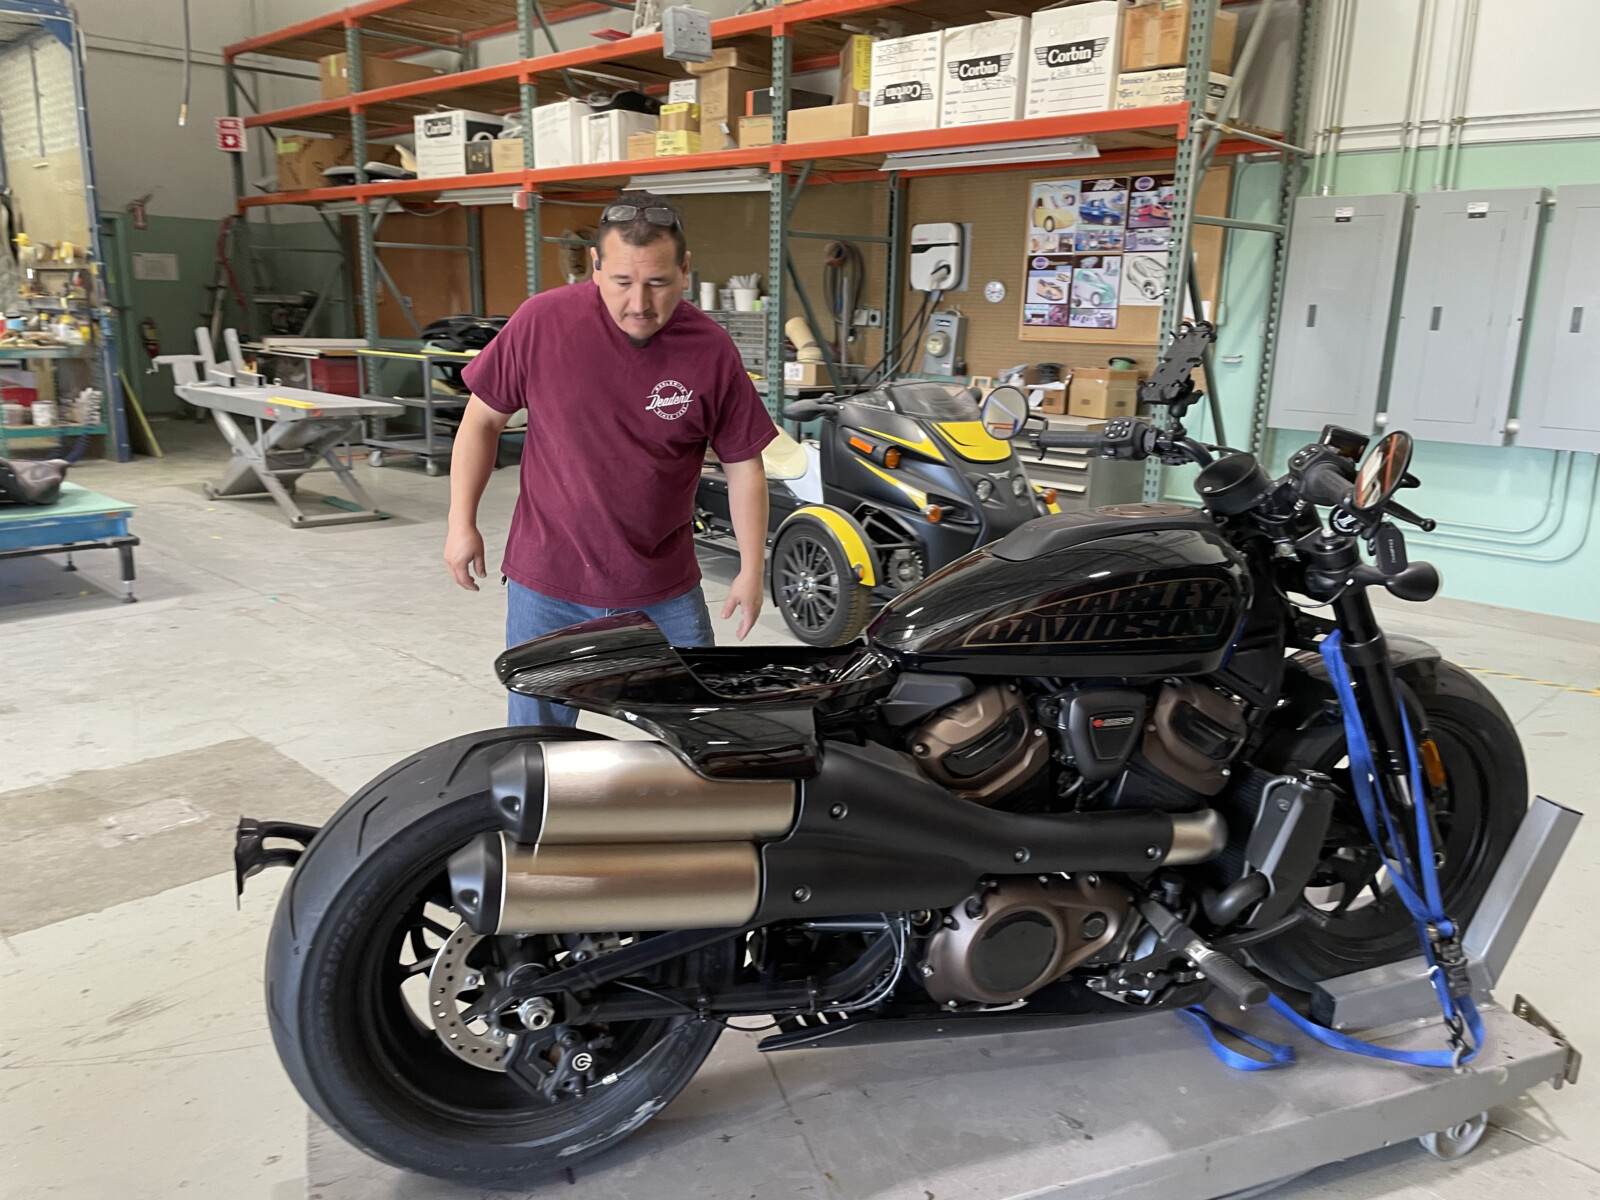 Vince working on 2021 HD 1250 Sportster S accessories.